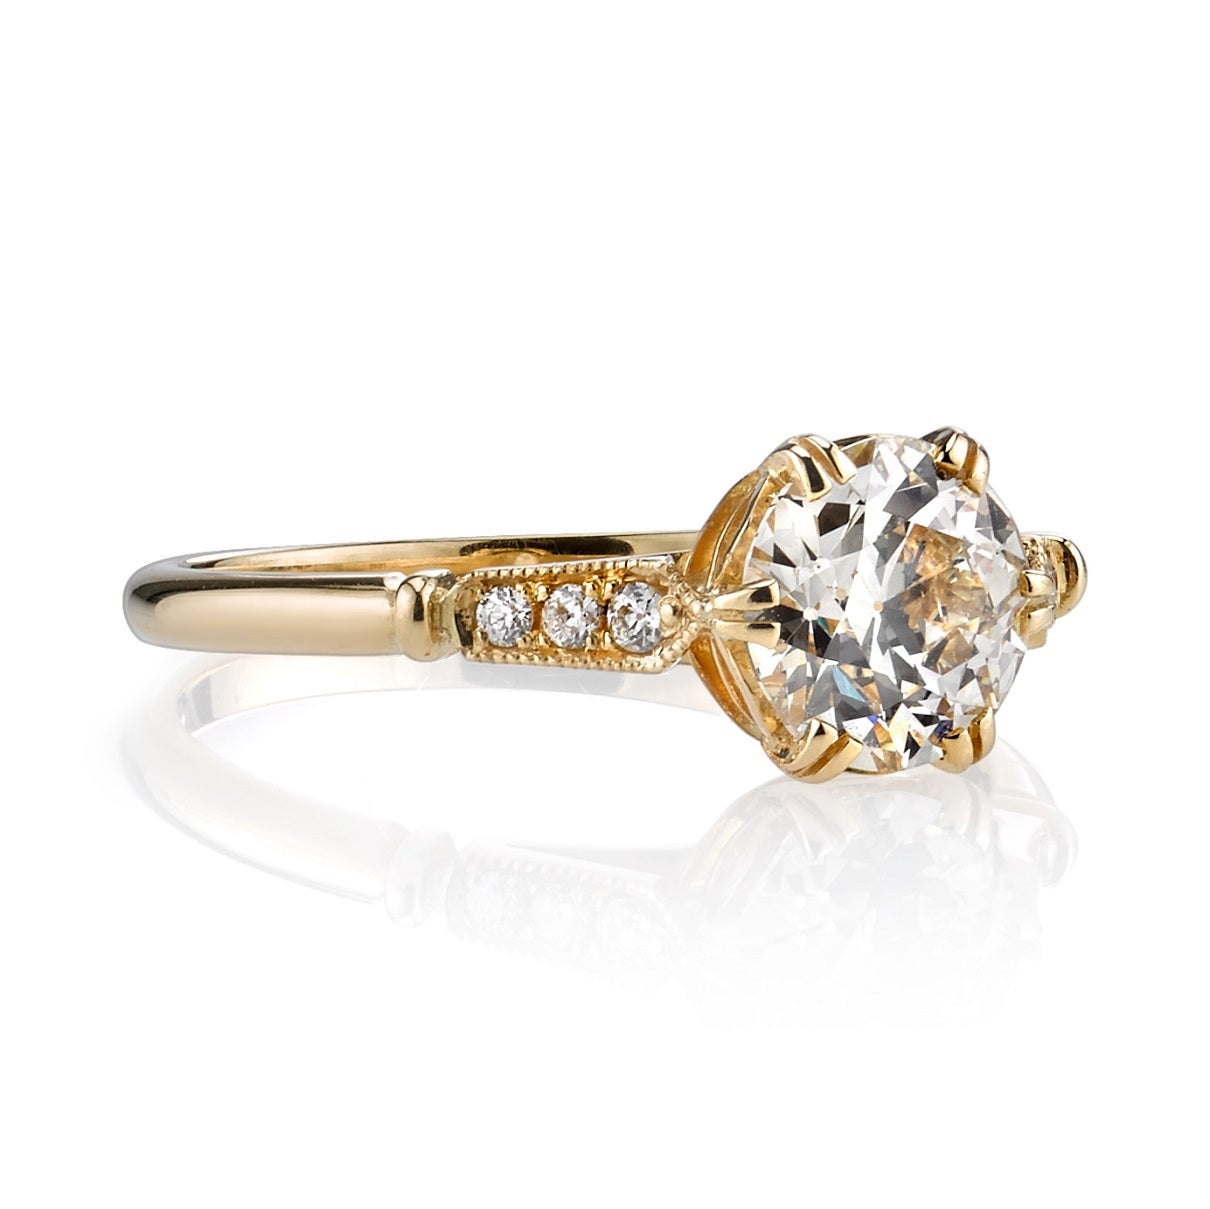 1.07ct K/VS1 EGL certified old European cut diamond set in a handcrafted 18K yellow gold mounting. A classic solitaire design featuring a detailed gallery and tapering accent diamonds.